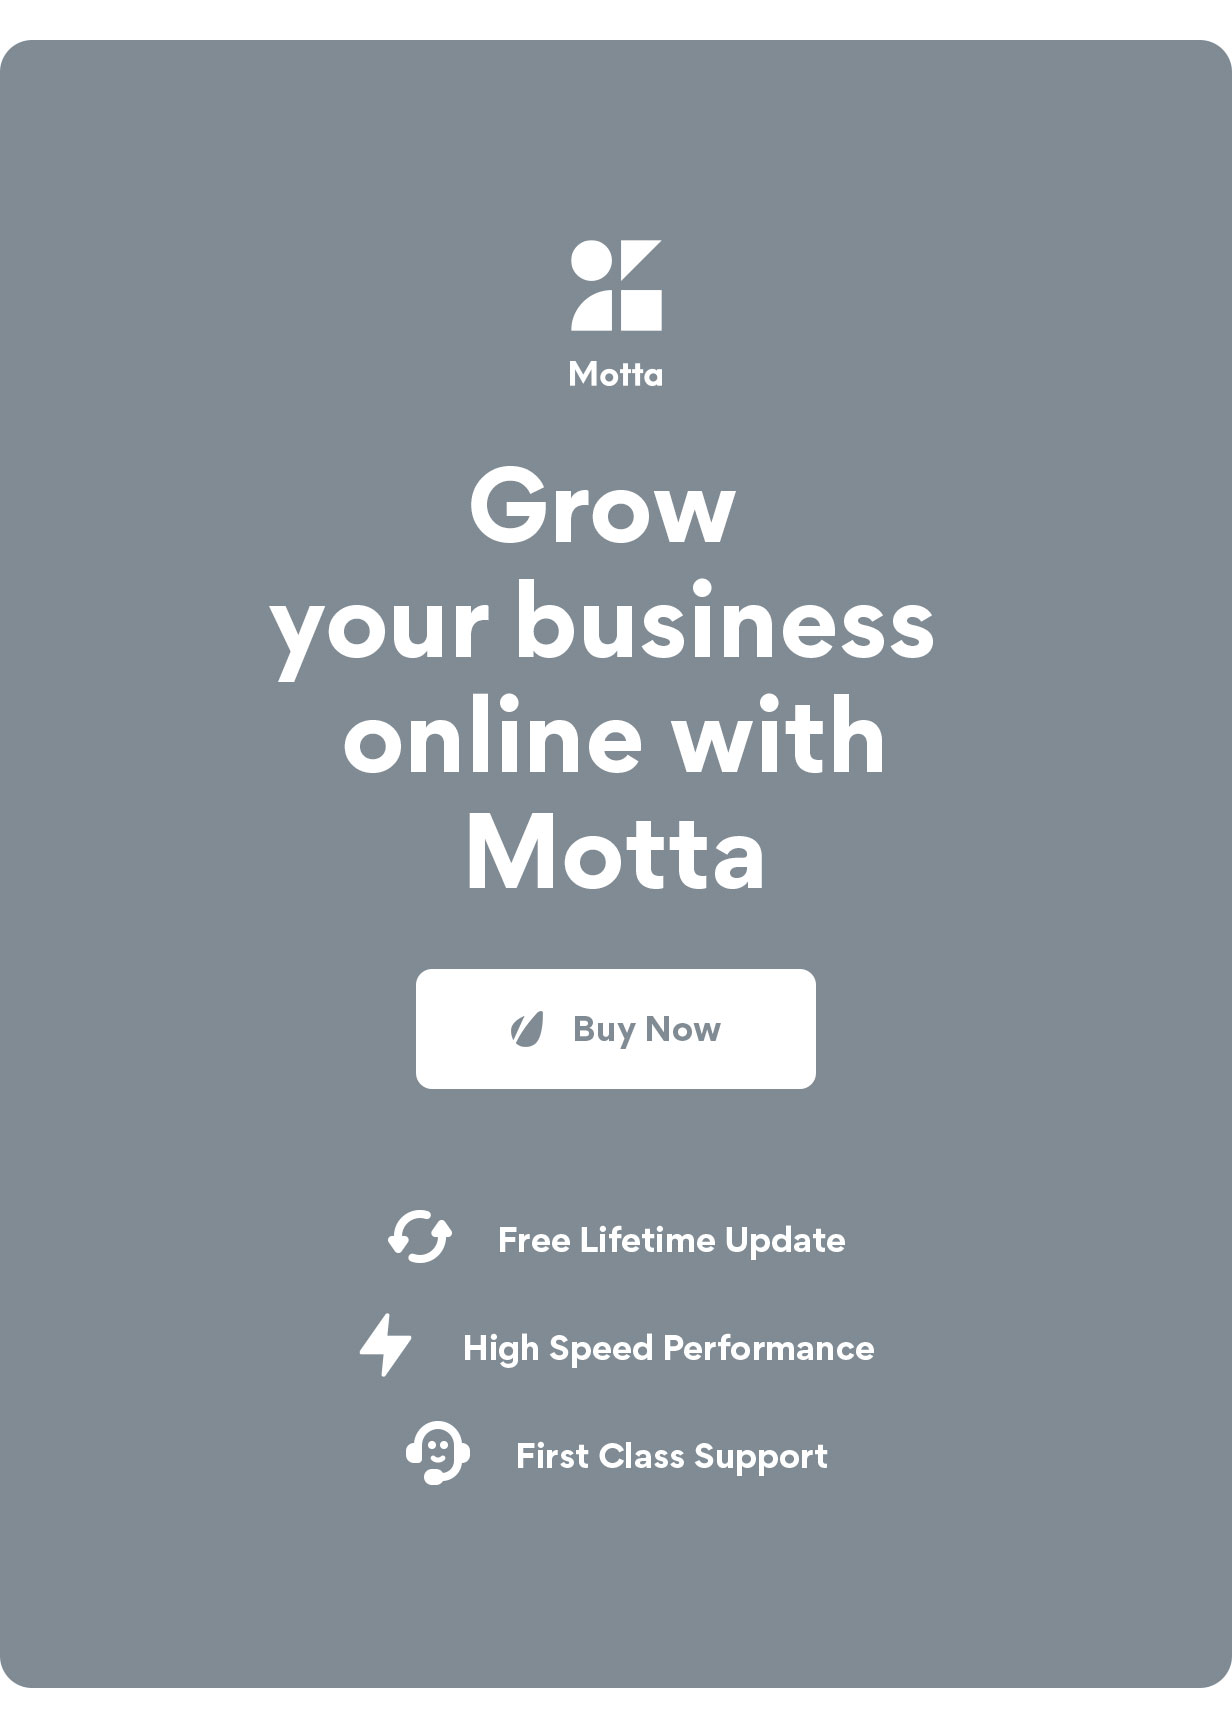 Motta WooCommerce theme - Grow your business now with Motta